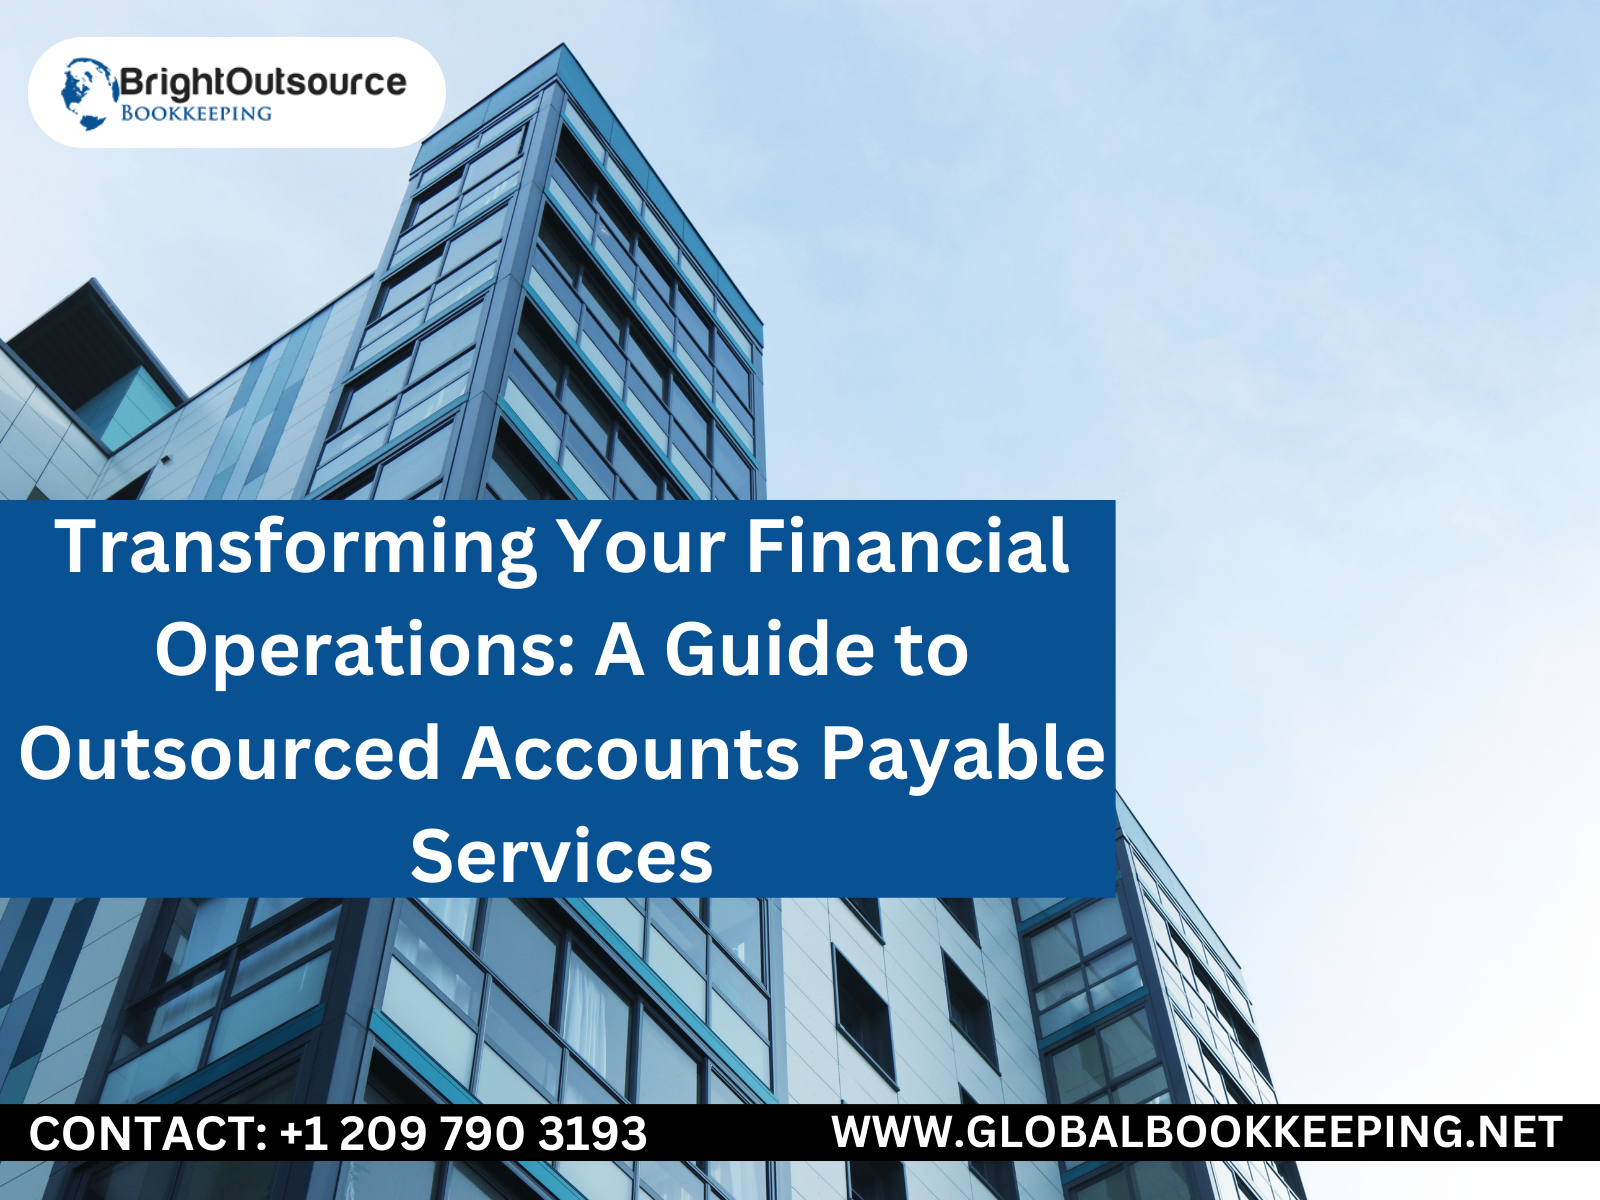 Transforming Your Financial Operations: A Guide to Outsourced Accounts Payable Services